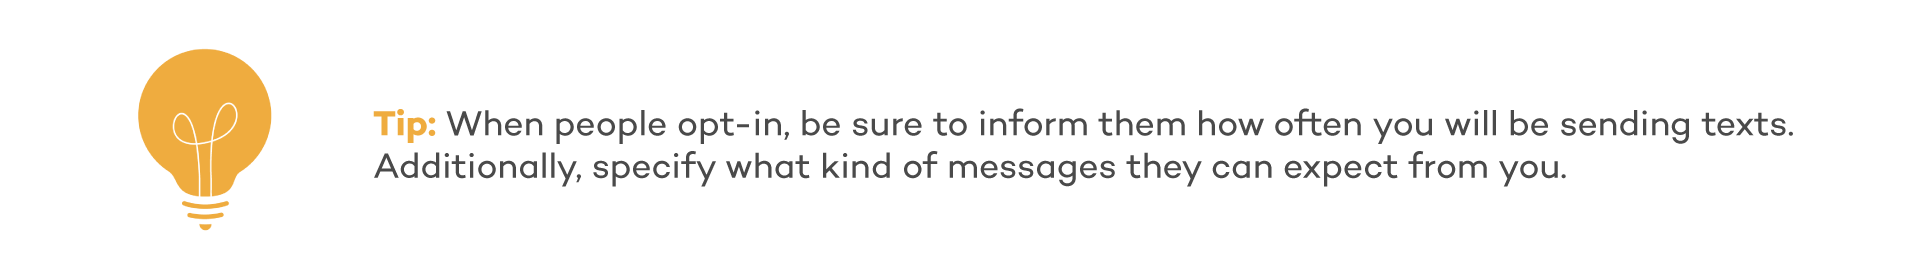 Tip: When people opt-in, be sure to inform them how often you will be sending texts. additionaly, specify what kind of messages they can expect from you.